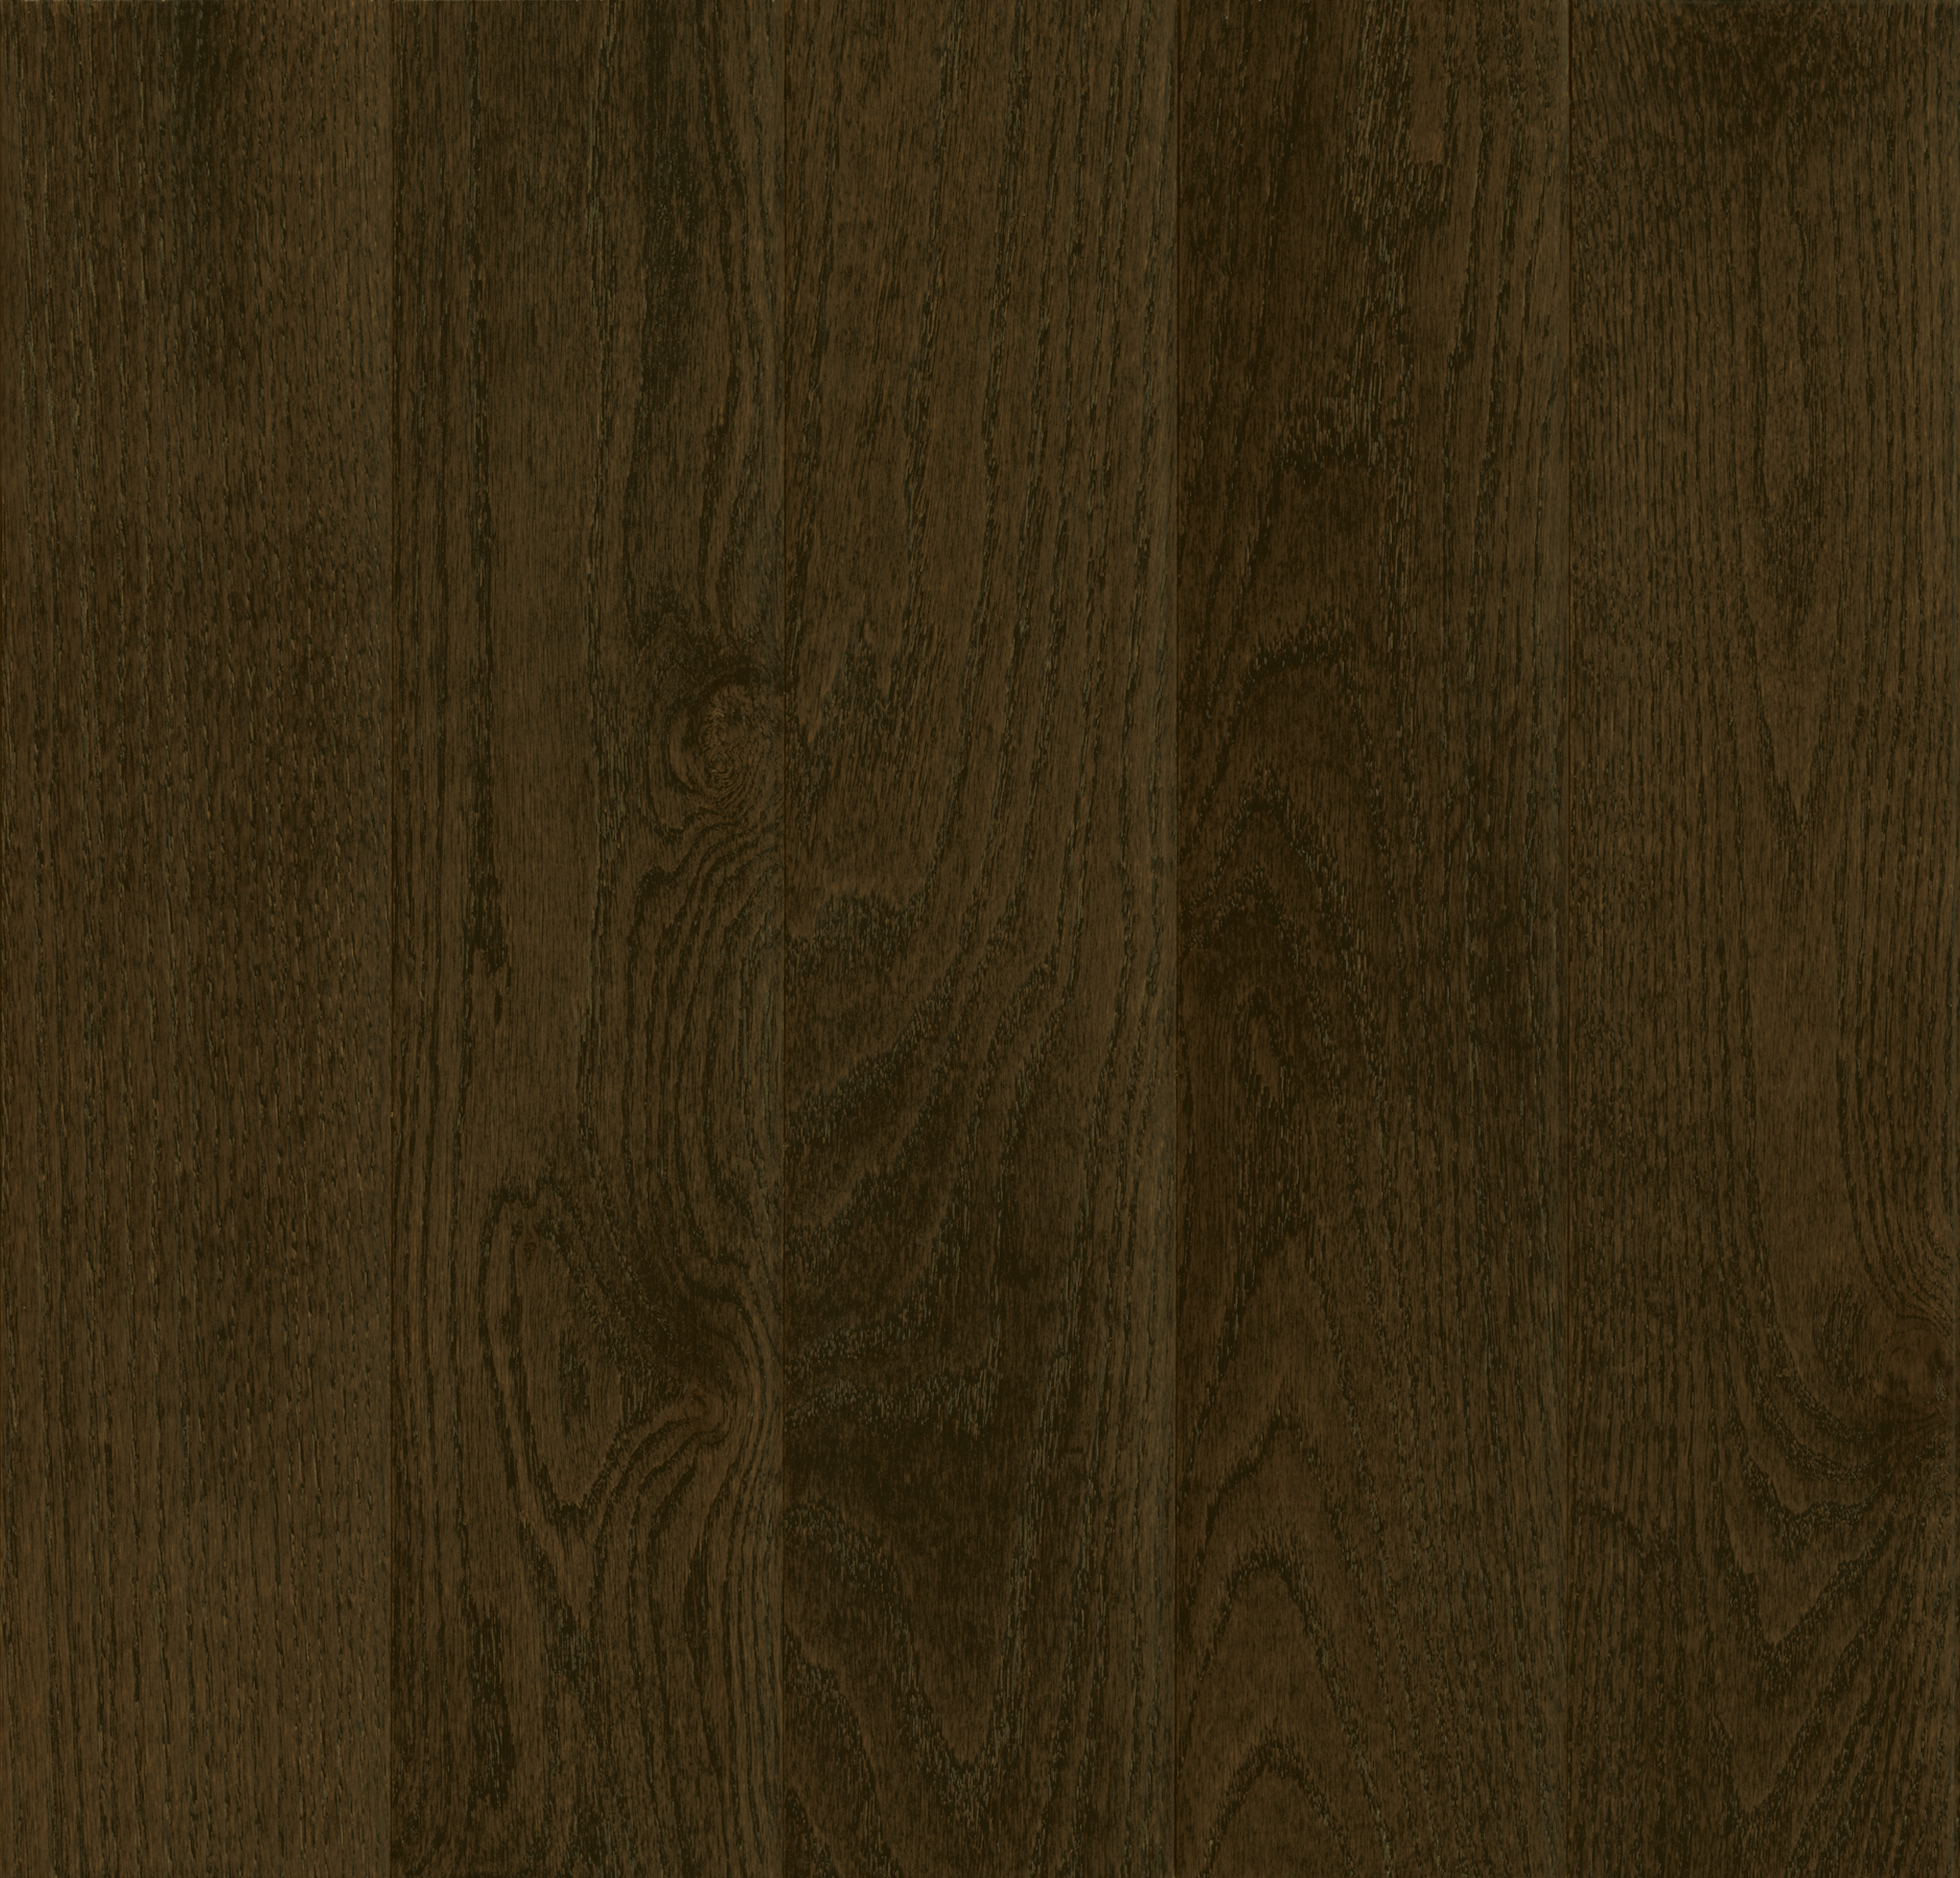 Natural Forest Bear Run Solid Hardwood NFSK590S